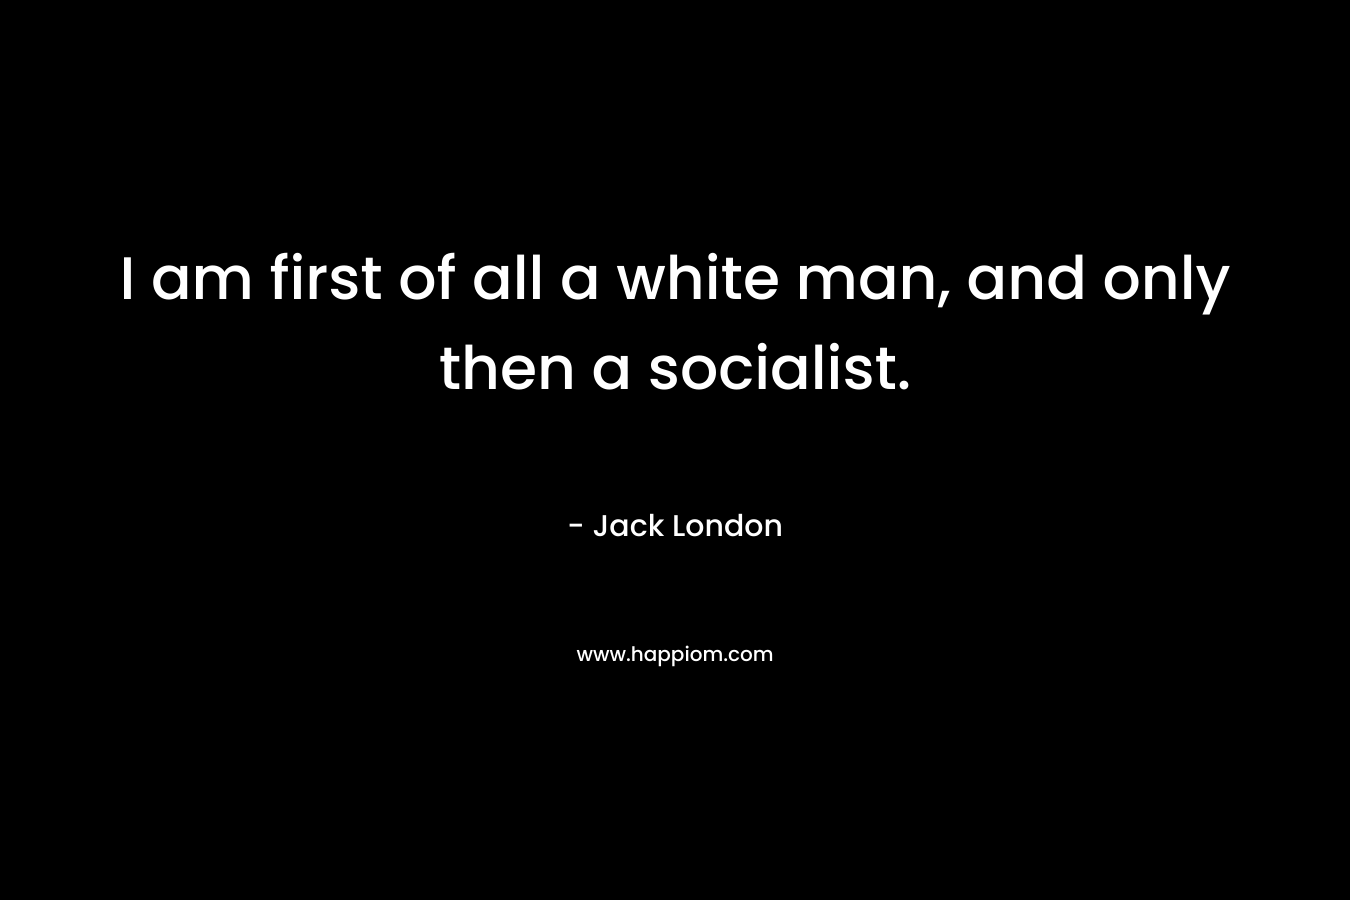 I am first of all a white man, and only then a socialist.